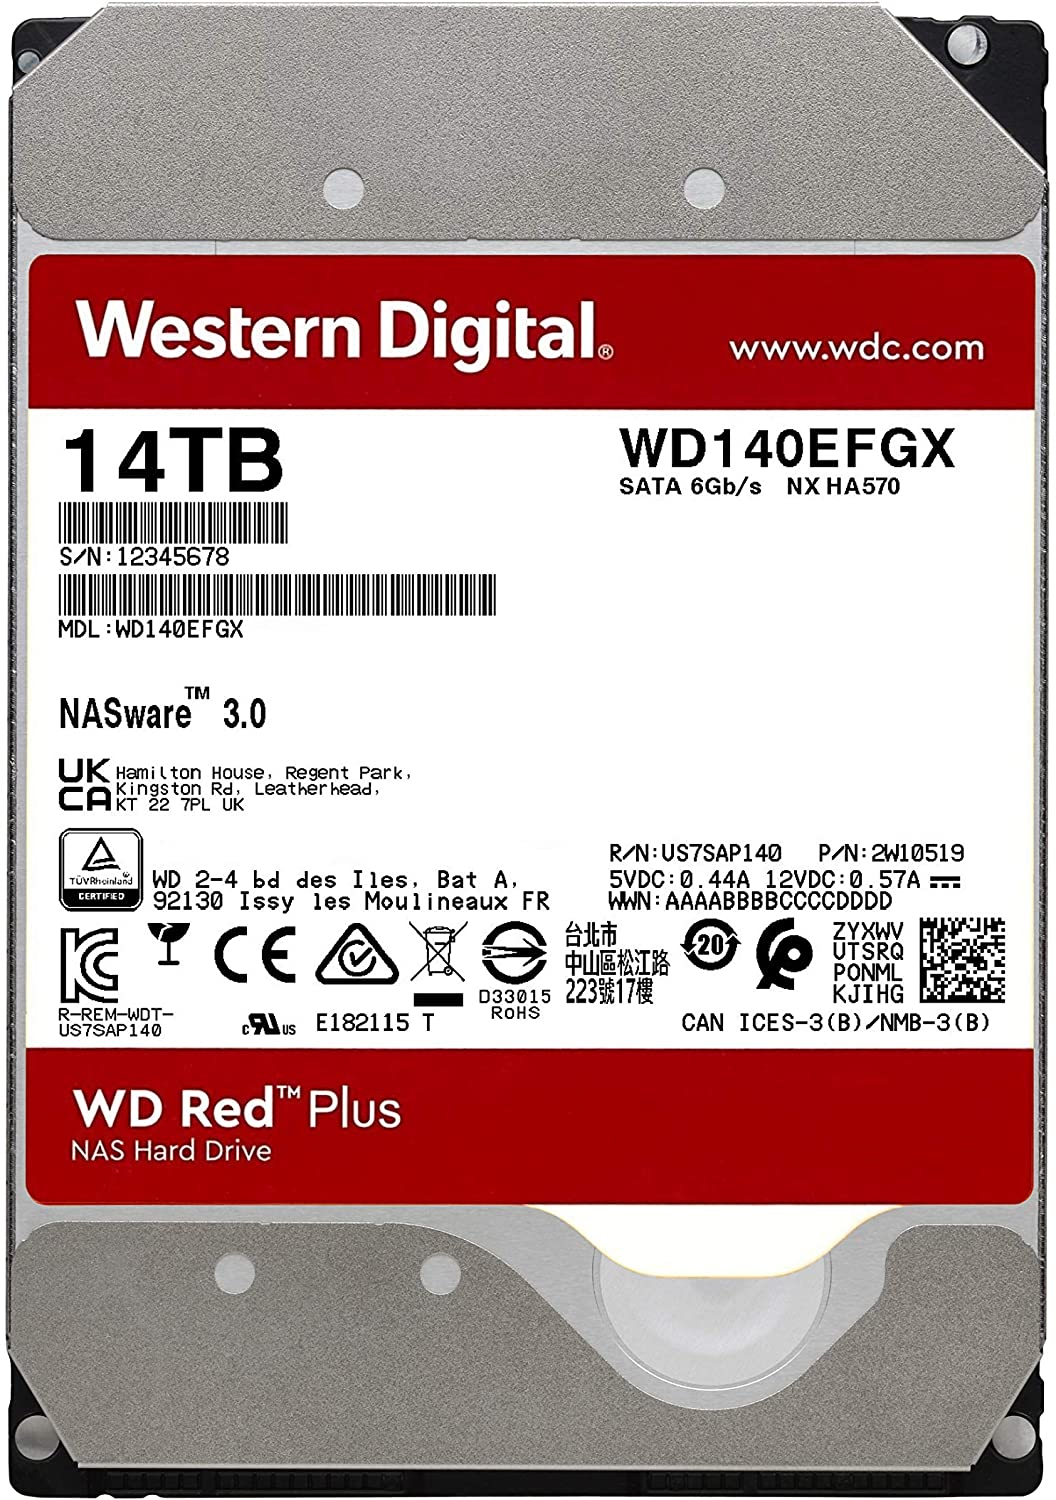 Have en picnic Seraph Sikker Western Digital 14TB WD Red Plus NAS Internal Hard Drive HDD - 7200 RPM,  SATA 6 GB/s, CMR, 512 MB Cache, 3.5" - WD140EFGX - Online Gaming Computer  Accessories store